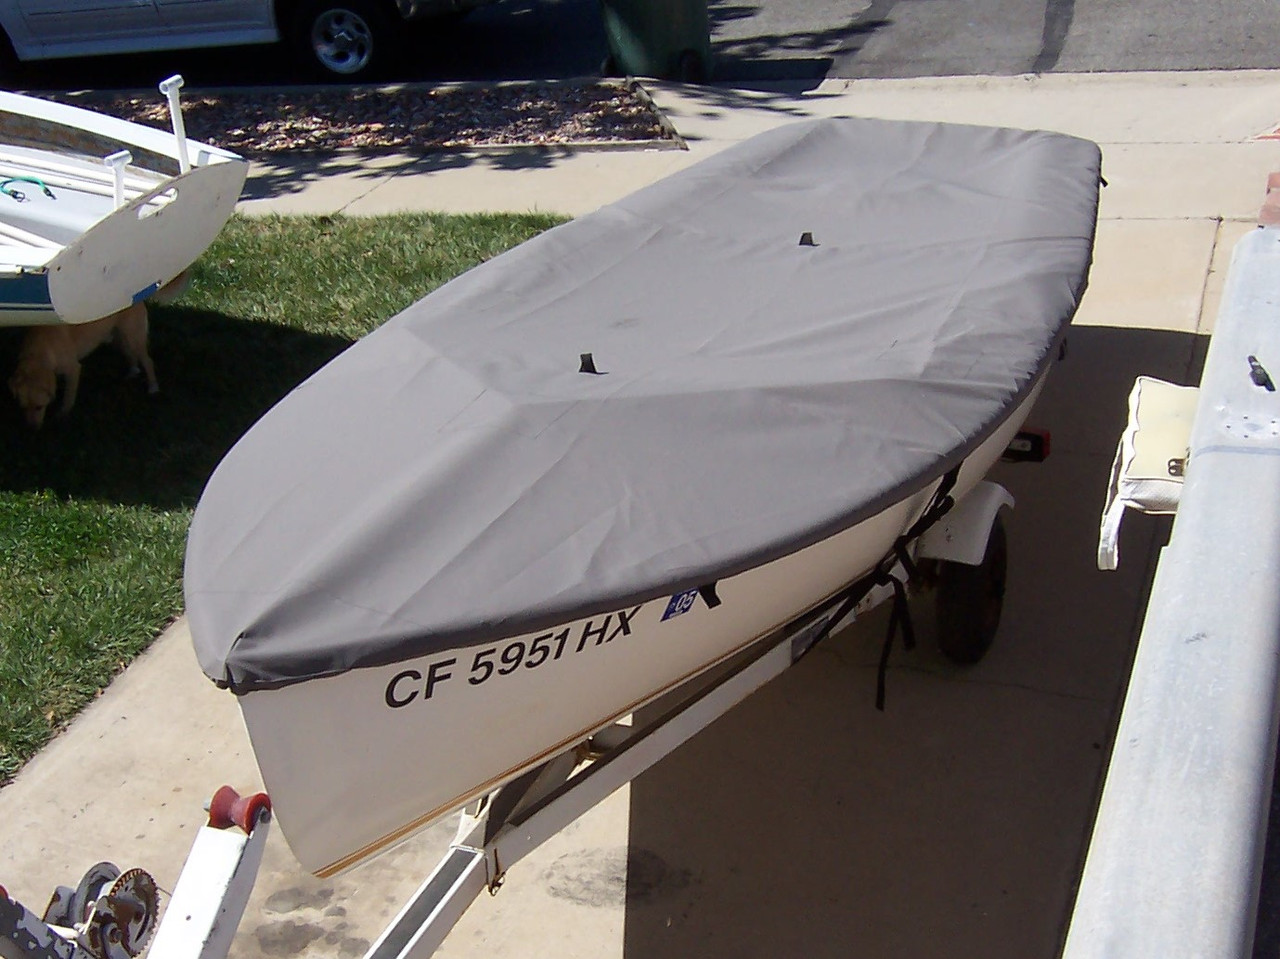 Vagabond 14 Sailboat Top Deck Cover made in America by skilled artisans at SLO Sail and Canvas. Cover shown in Polyester Charcoal Gray. Available in 3 fabrics and many color choices.
